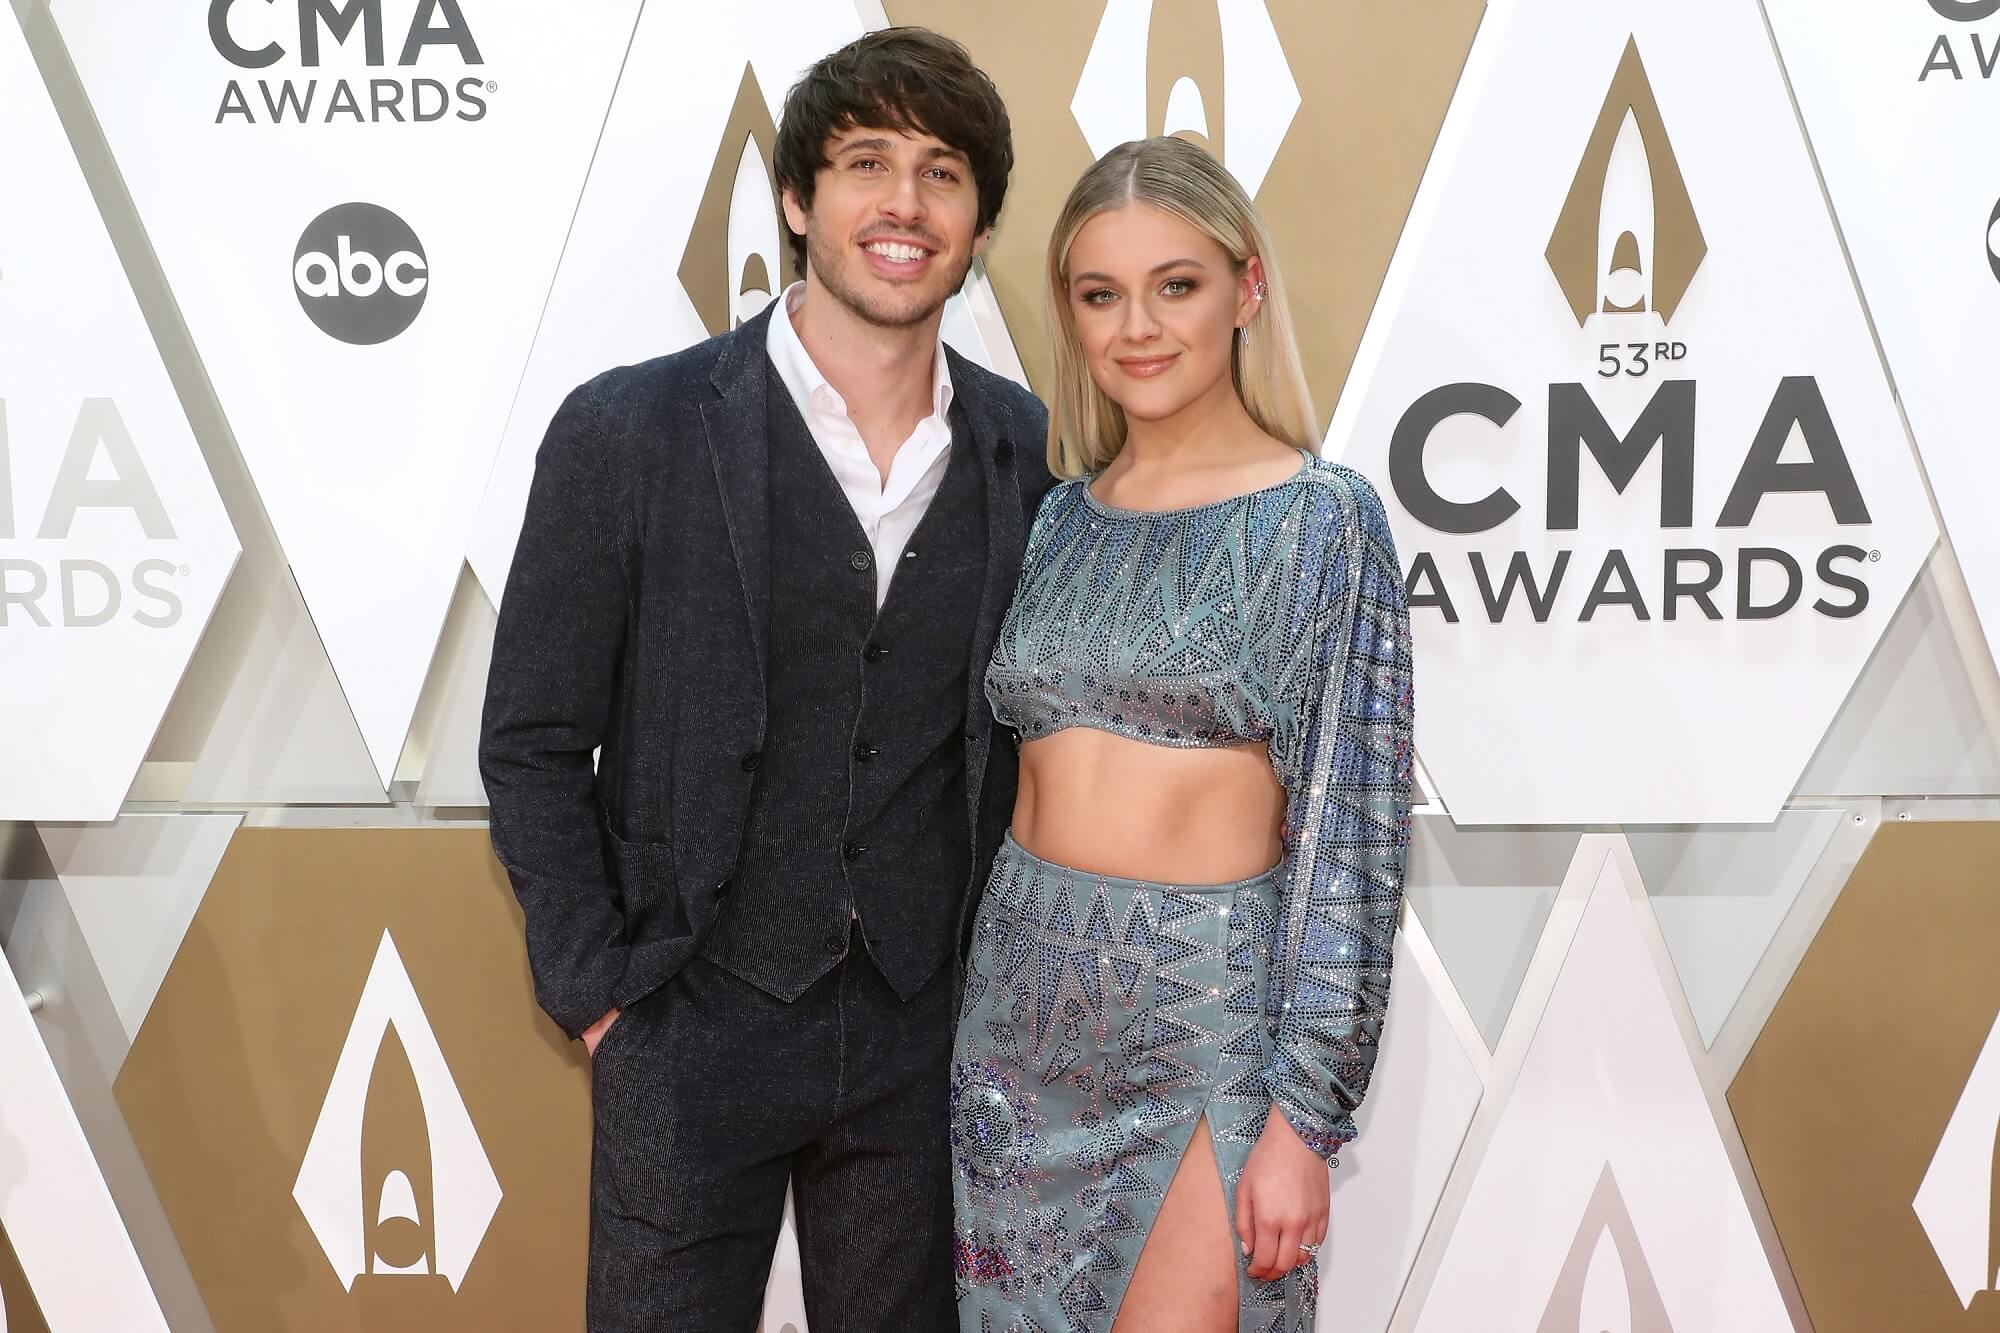 Morgan Evans and Kelsea Ballerini stand together in front of a white and gold CMA Awards backdrop